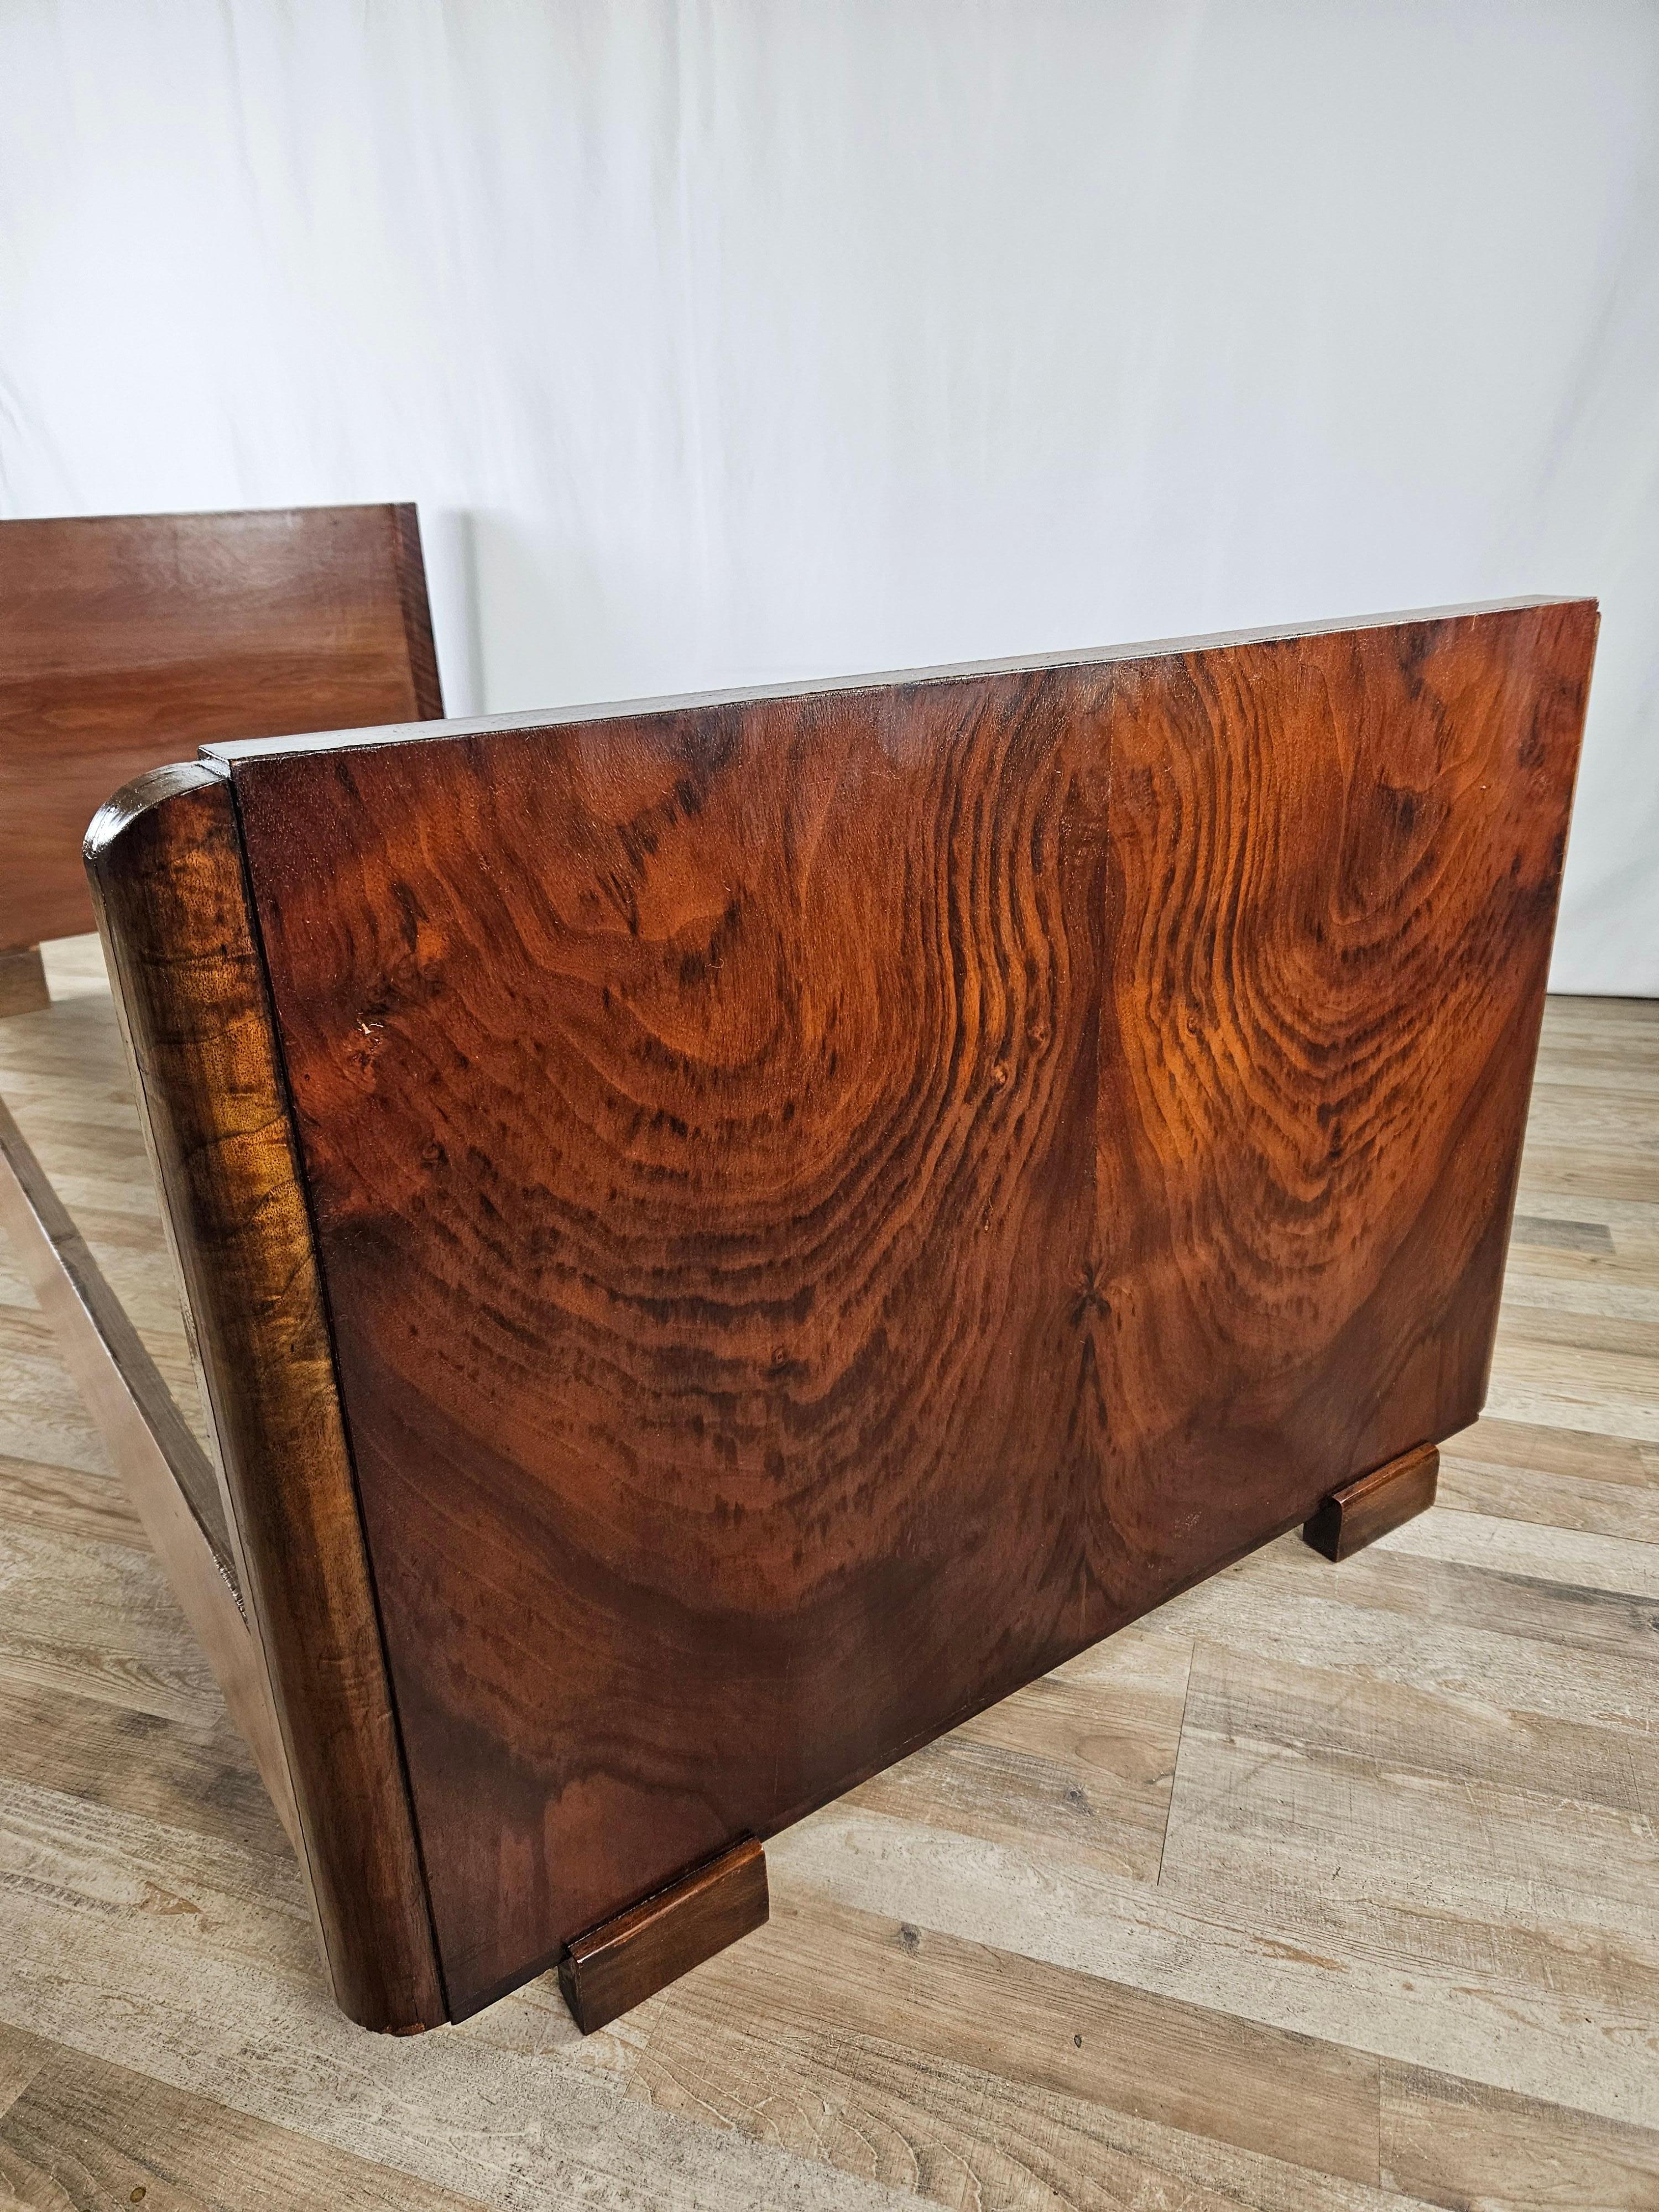 Early 1950s Art Deco-era single bed, frame entirely of walnut burl with softwood sides.

Oil and shellac polished cabinet, shows normal signs of wear due to age and use.

Measures:
L 90cm
D 204cm
H headboard 71cm
H footboard 63.5cm
Interior space